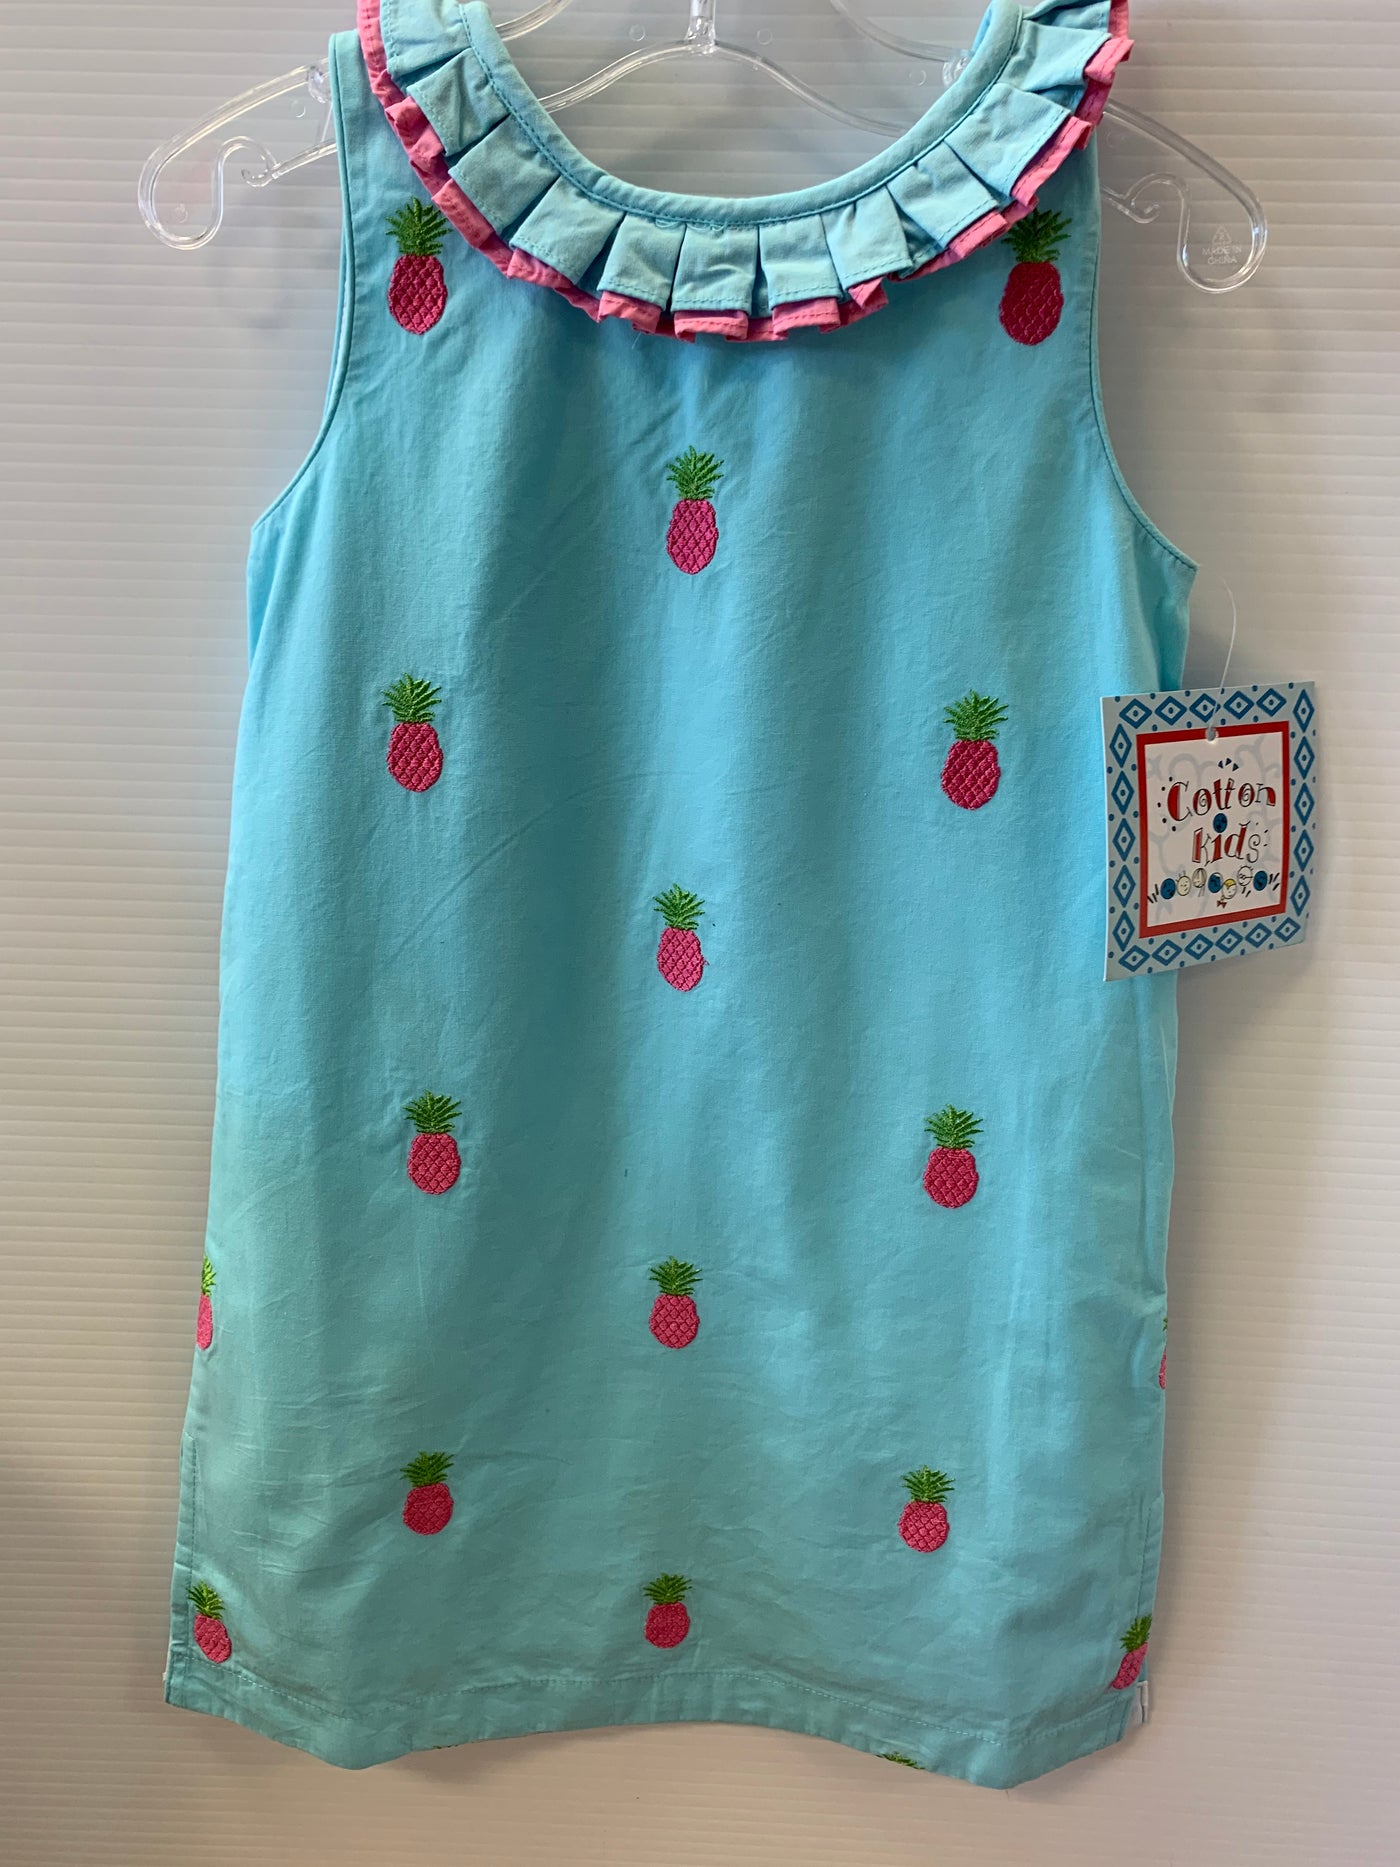 Pineapple embroidered dress